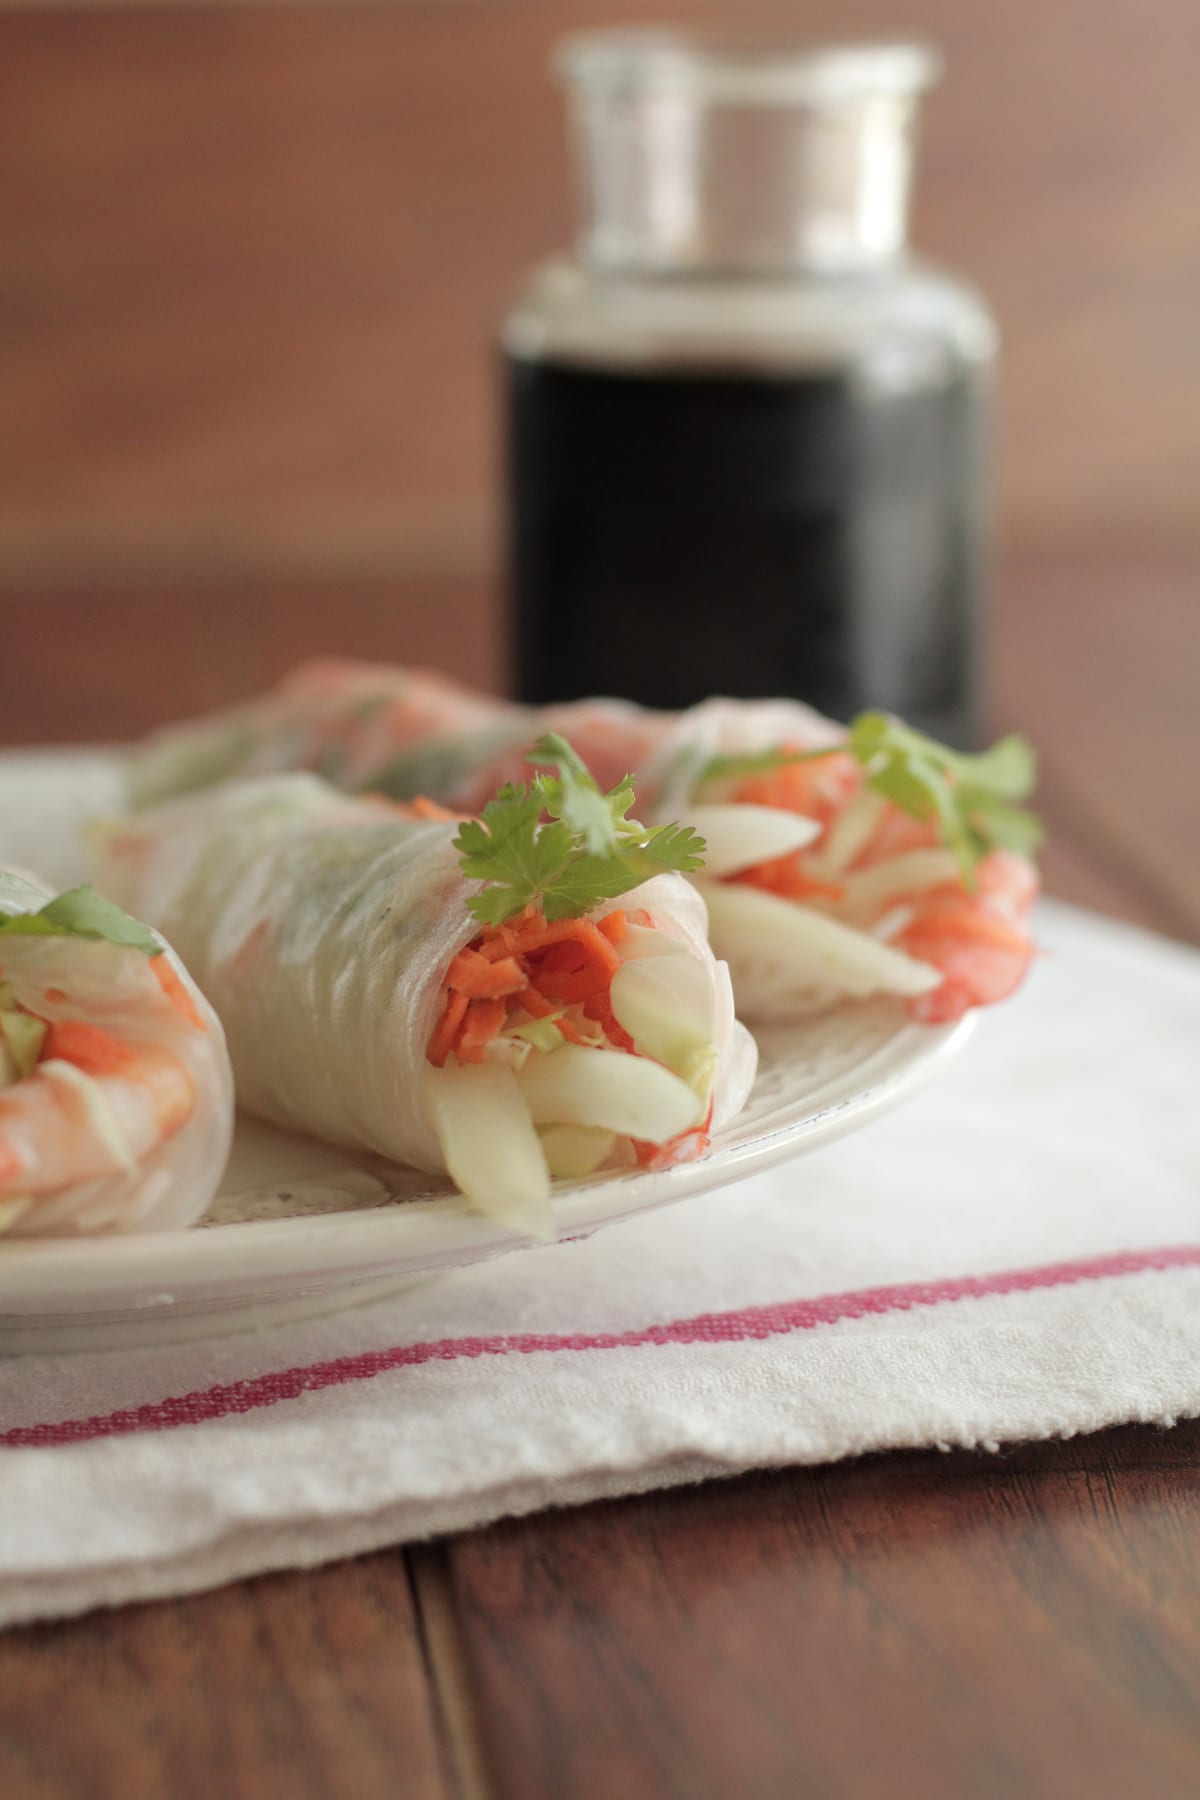 Shrimp Spring Rolls with Ginger-Soy Dipping Sauce